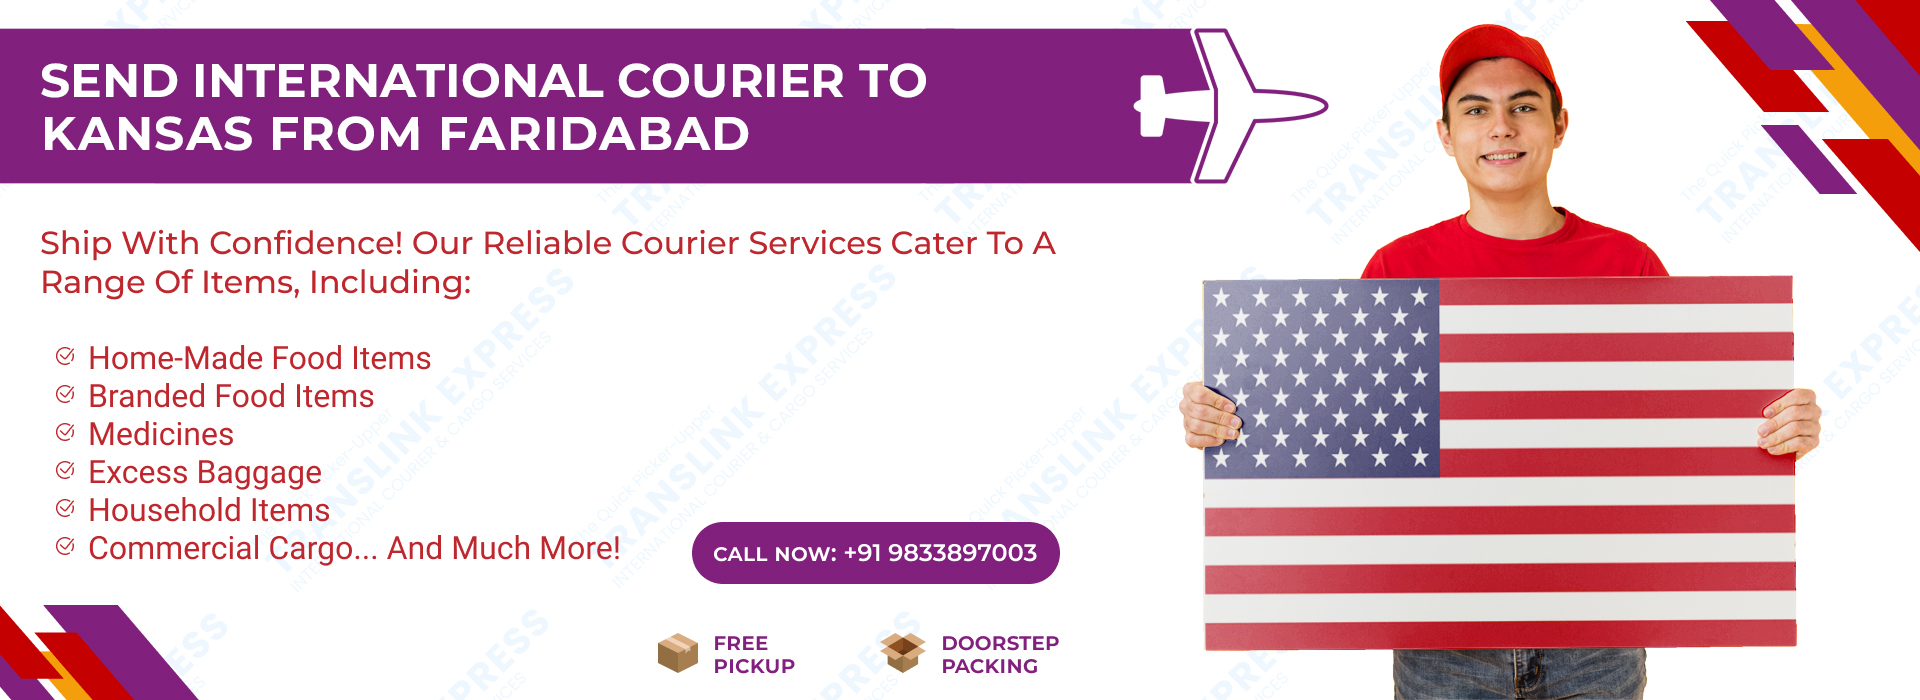 Courier to Kansas From Faridabad